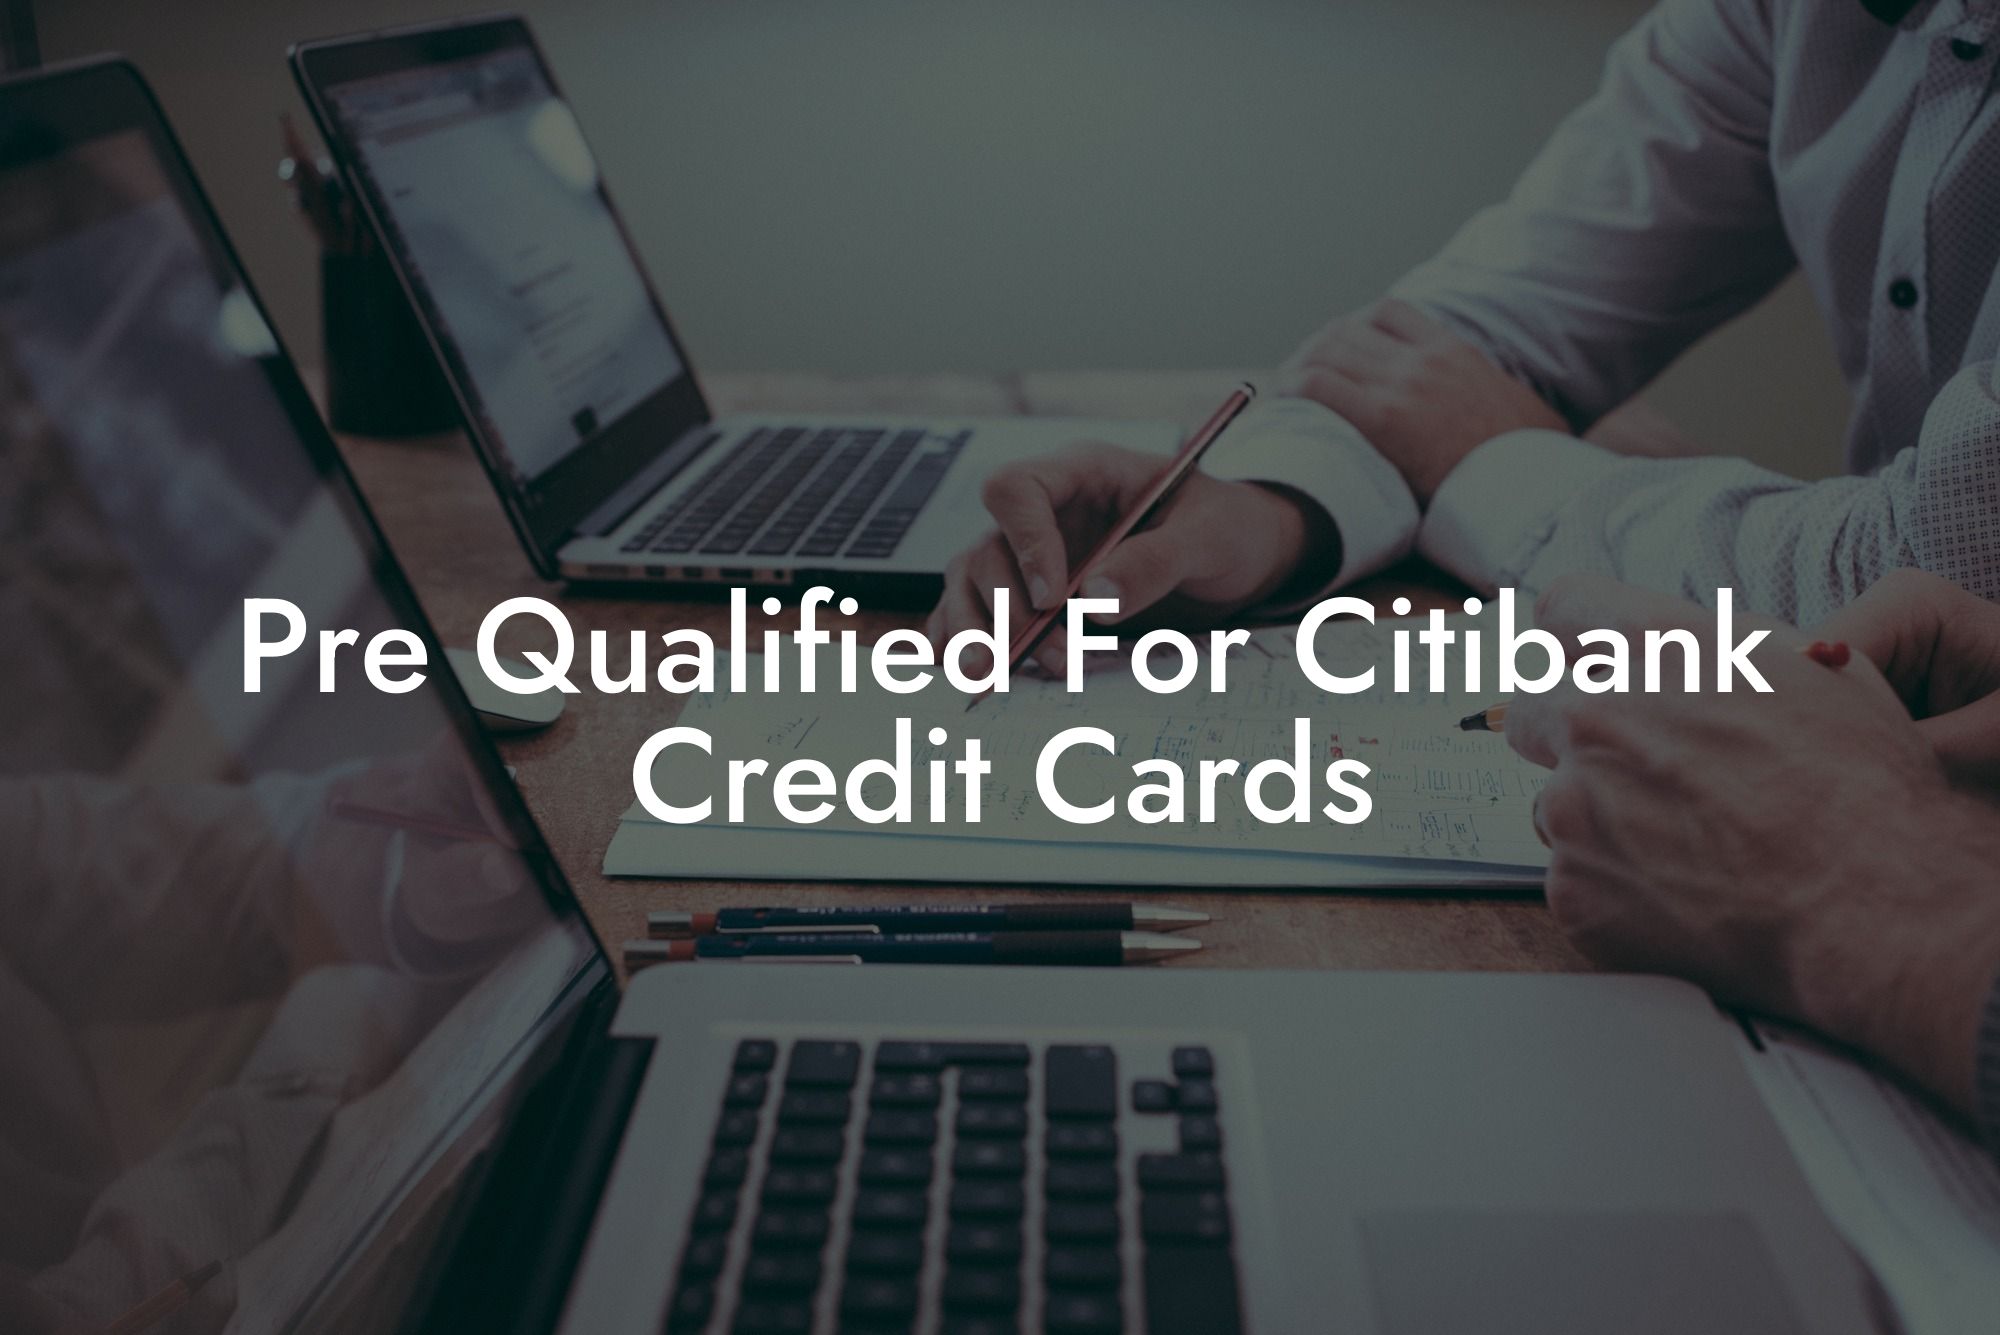 Pre Qualified For Citibank Credit Cards